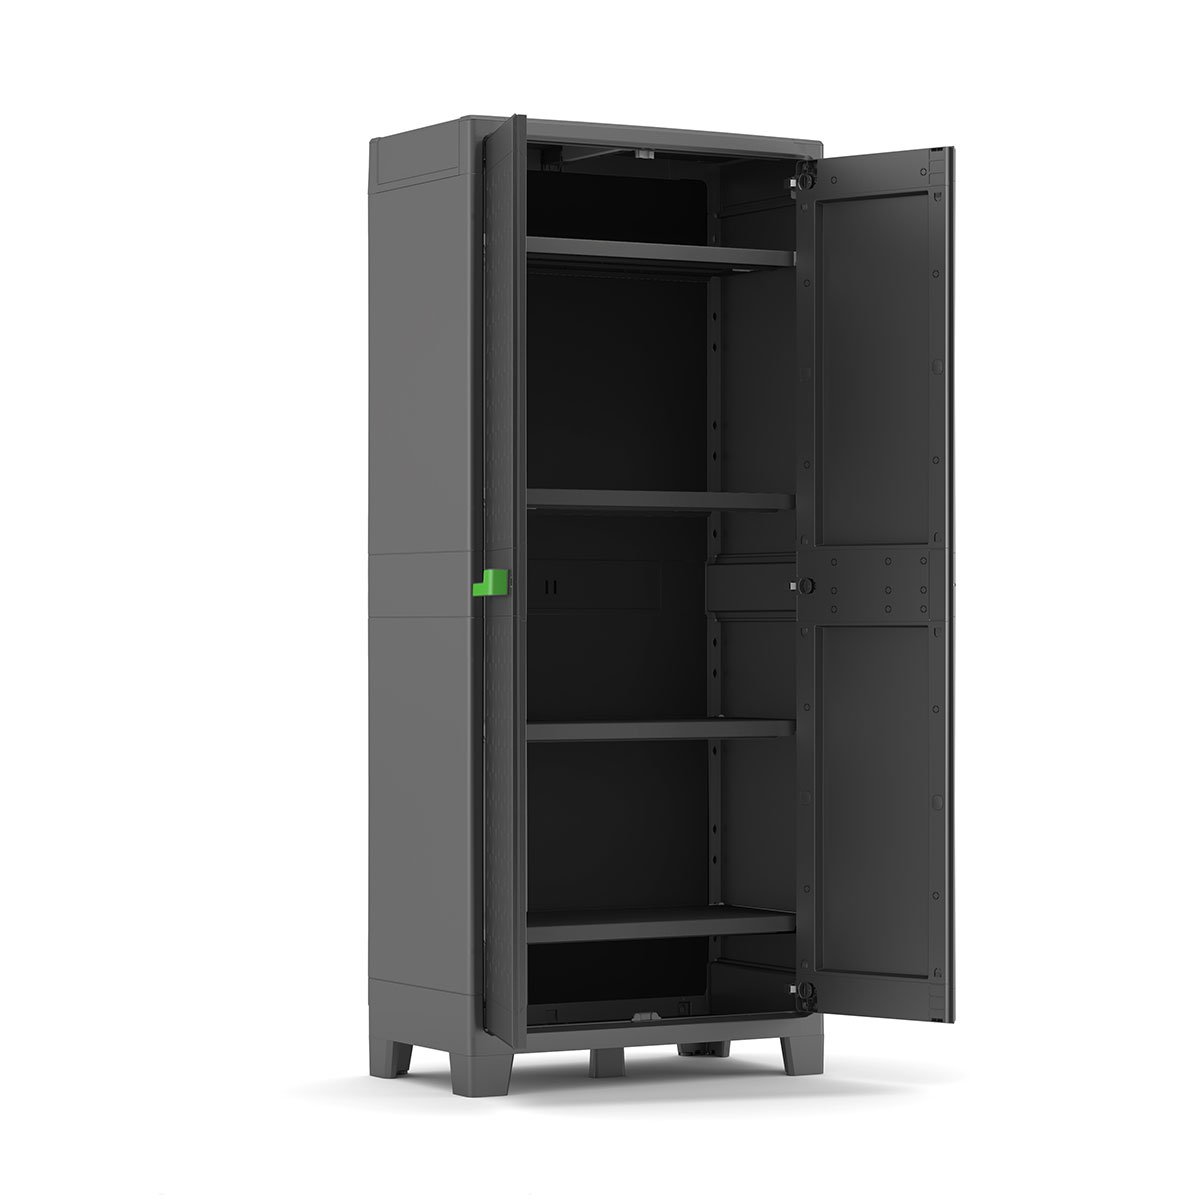 Moby high cabinet